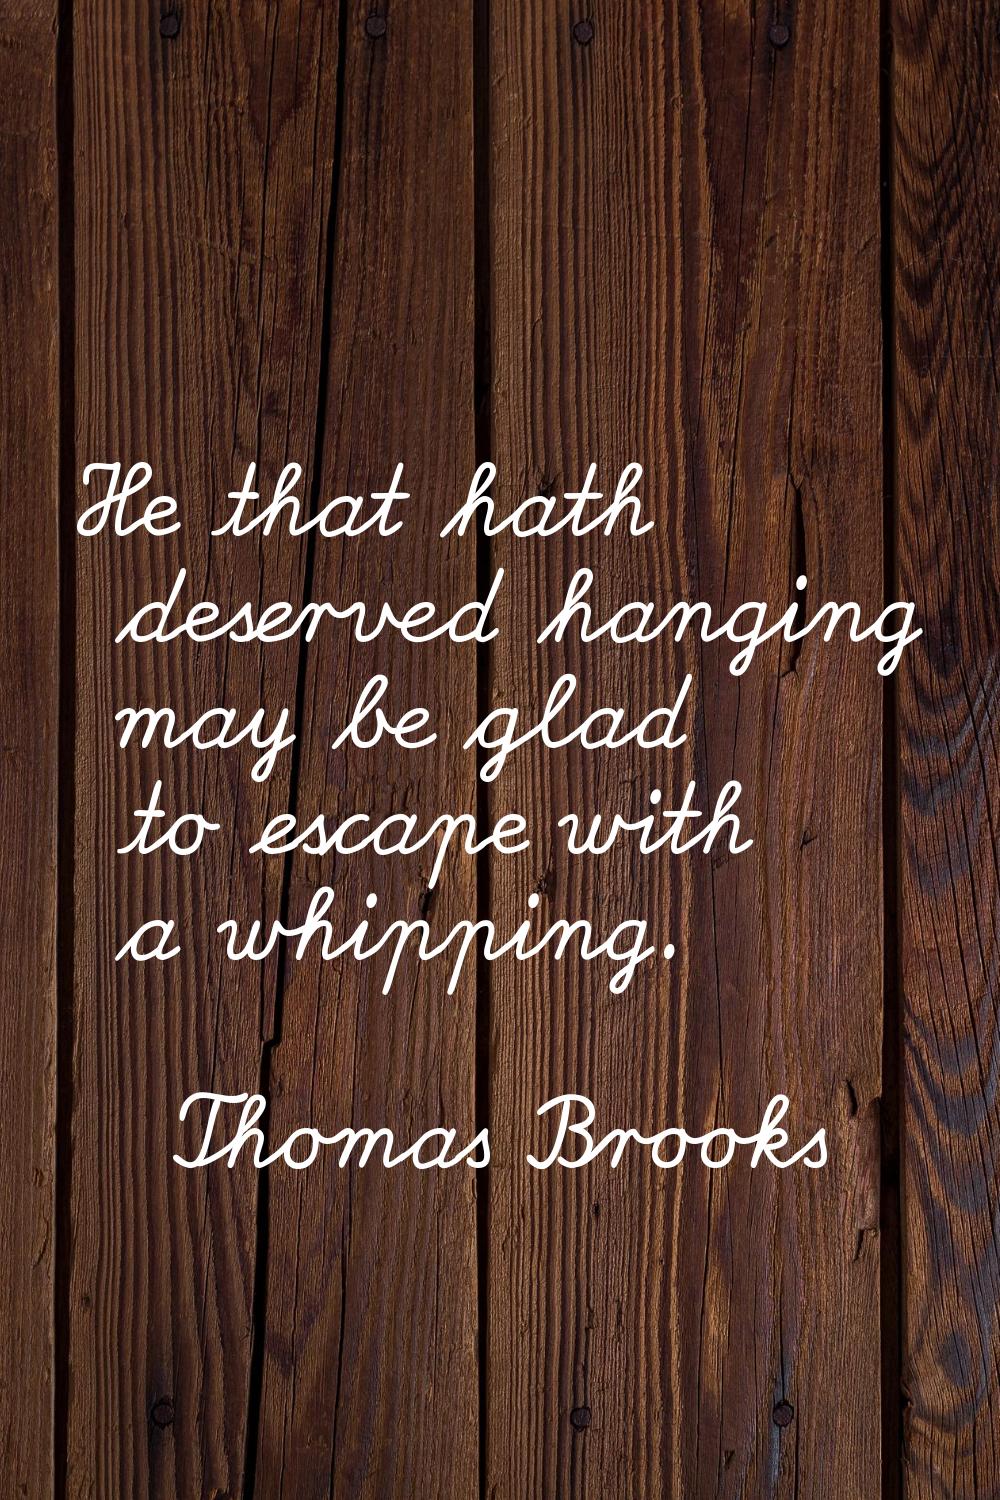 He that hath deserved hanging may be glad to escape with a whipping.